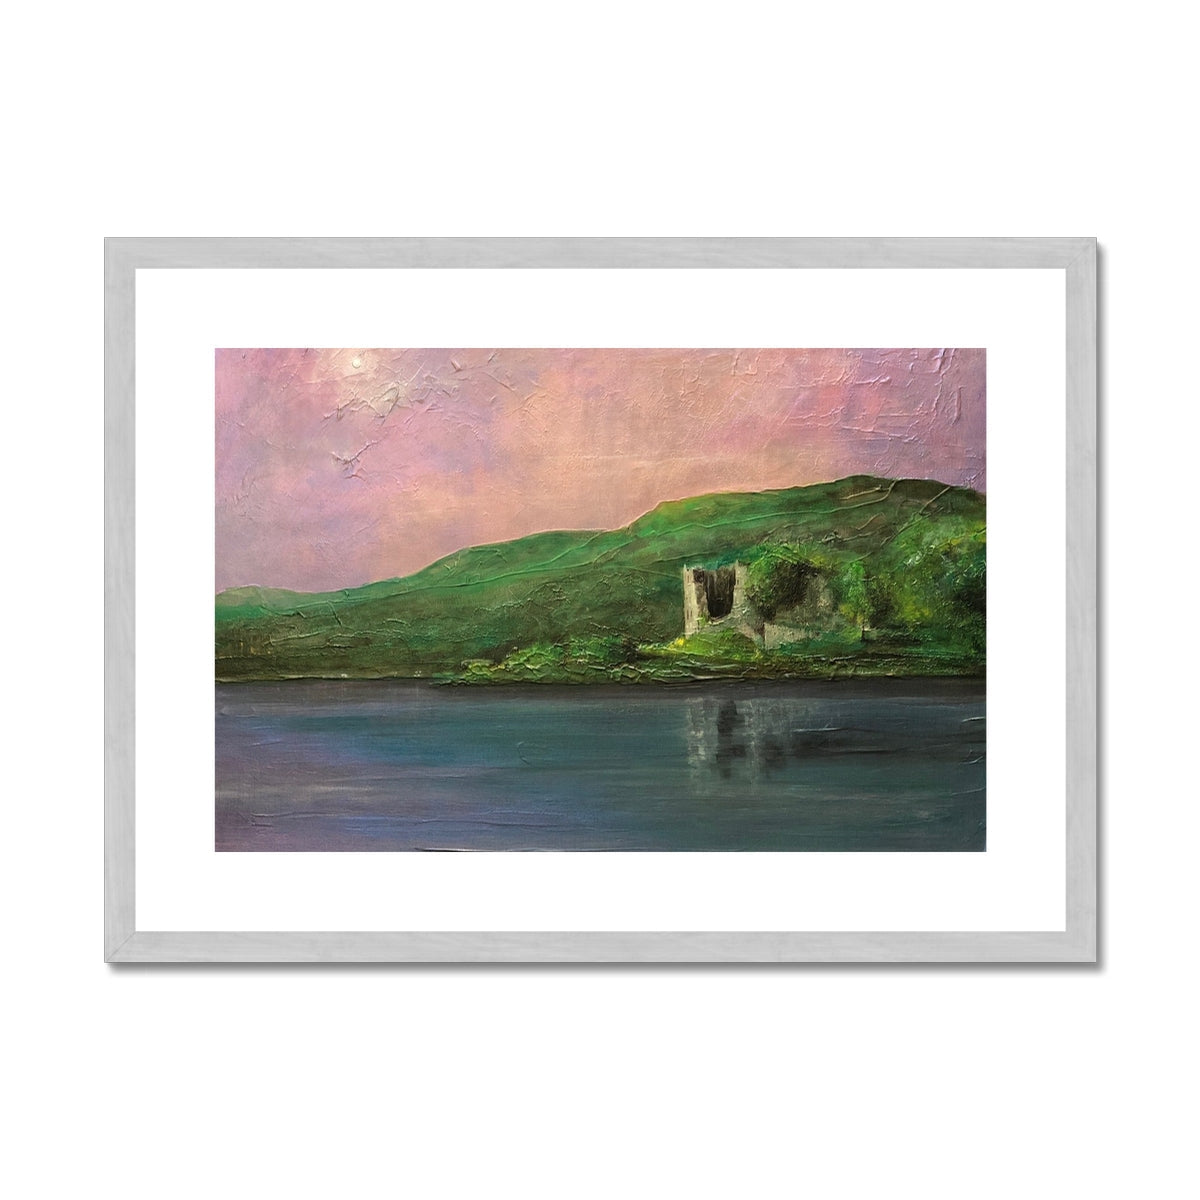 Old Castle Lachlan Painting | Antique Framed & Mounted Prints From Scotland-Antique Framed & Mounted Prints-Historic & Iconic Scotland Art Gallery-A2 Landscape-Silver Frame-Paintings, Prints, Homeware, Art Gifts From Scotland By Scottish Artist Kevin Hunter